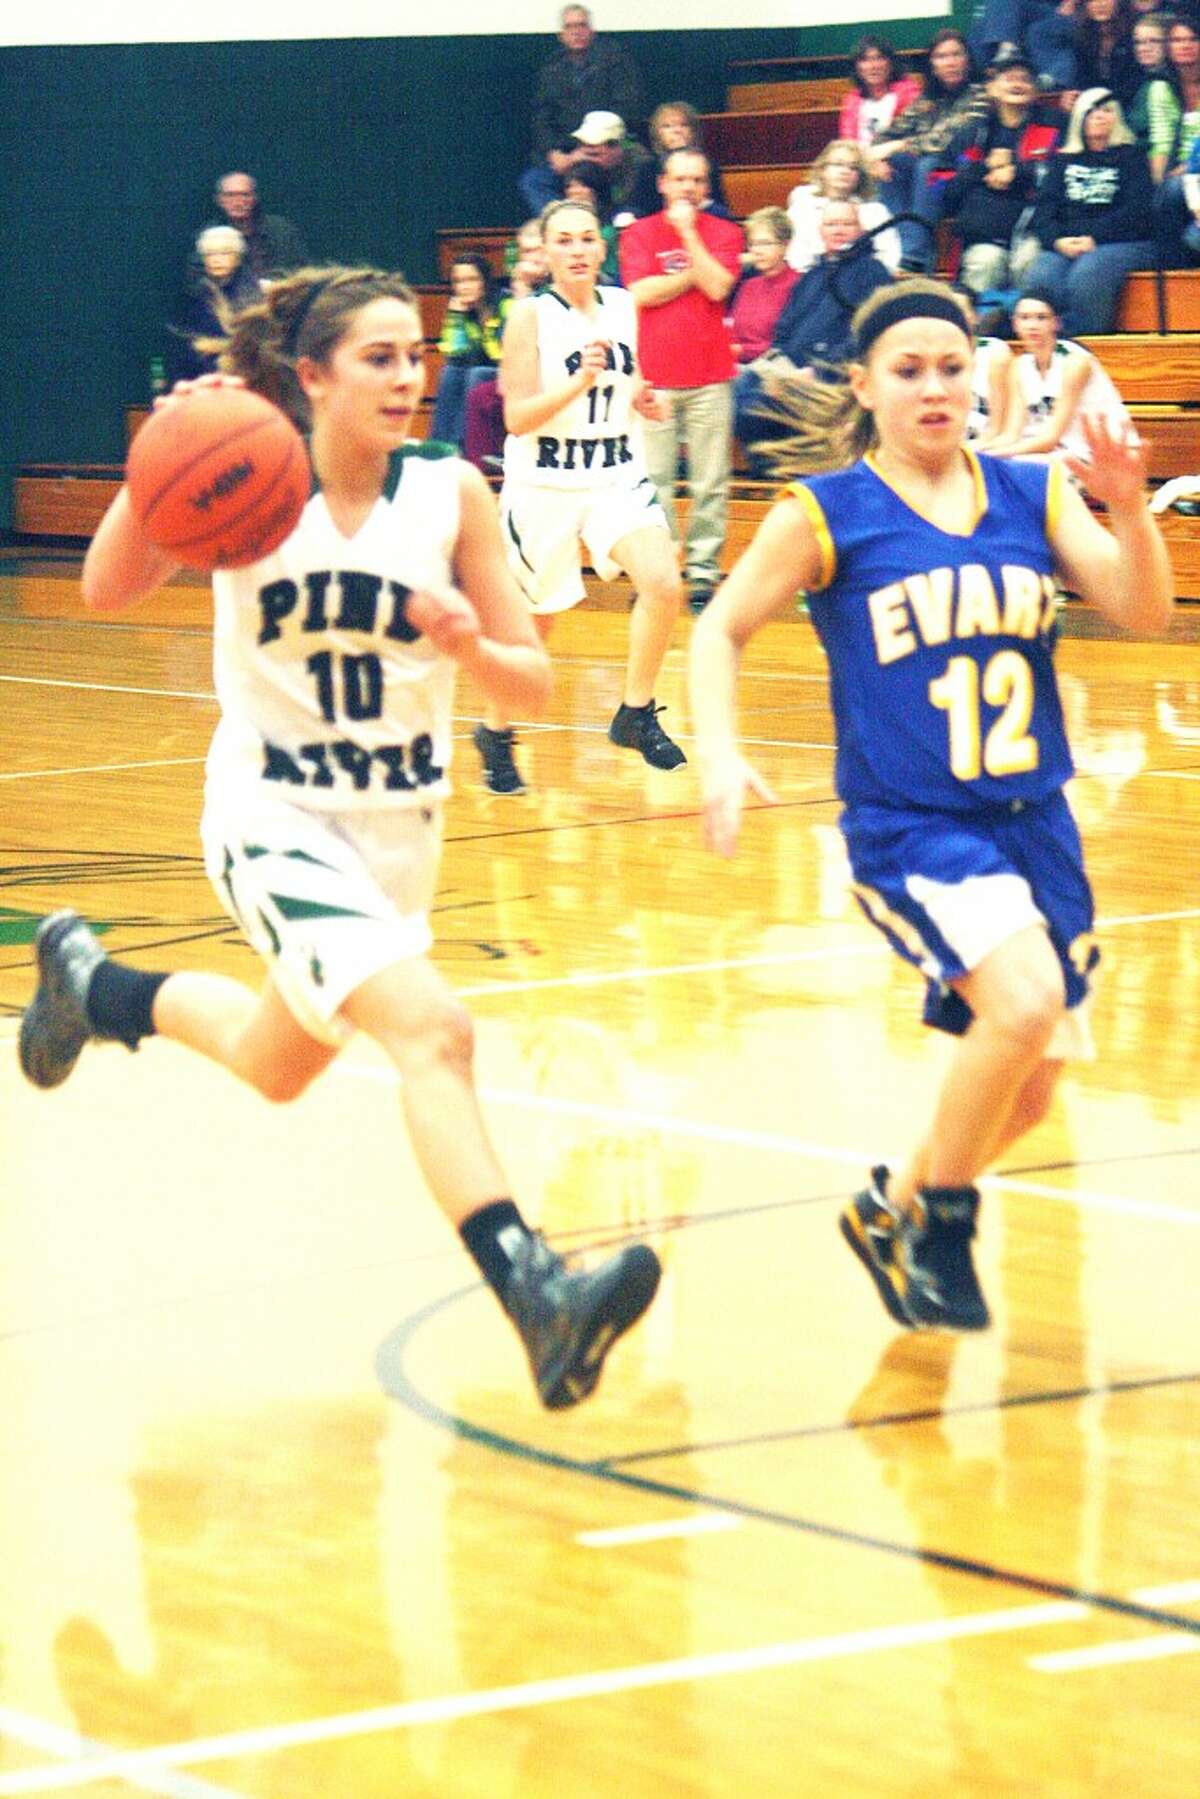 Two for Two: Kassy Nelson (10) drives past Evart’s Tabby Turley (12). (Herald Review photo/John Raffel)